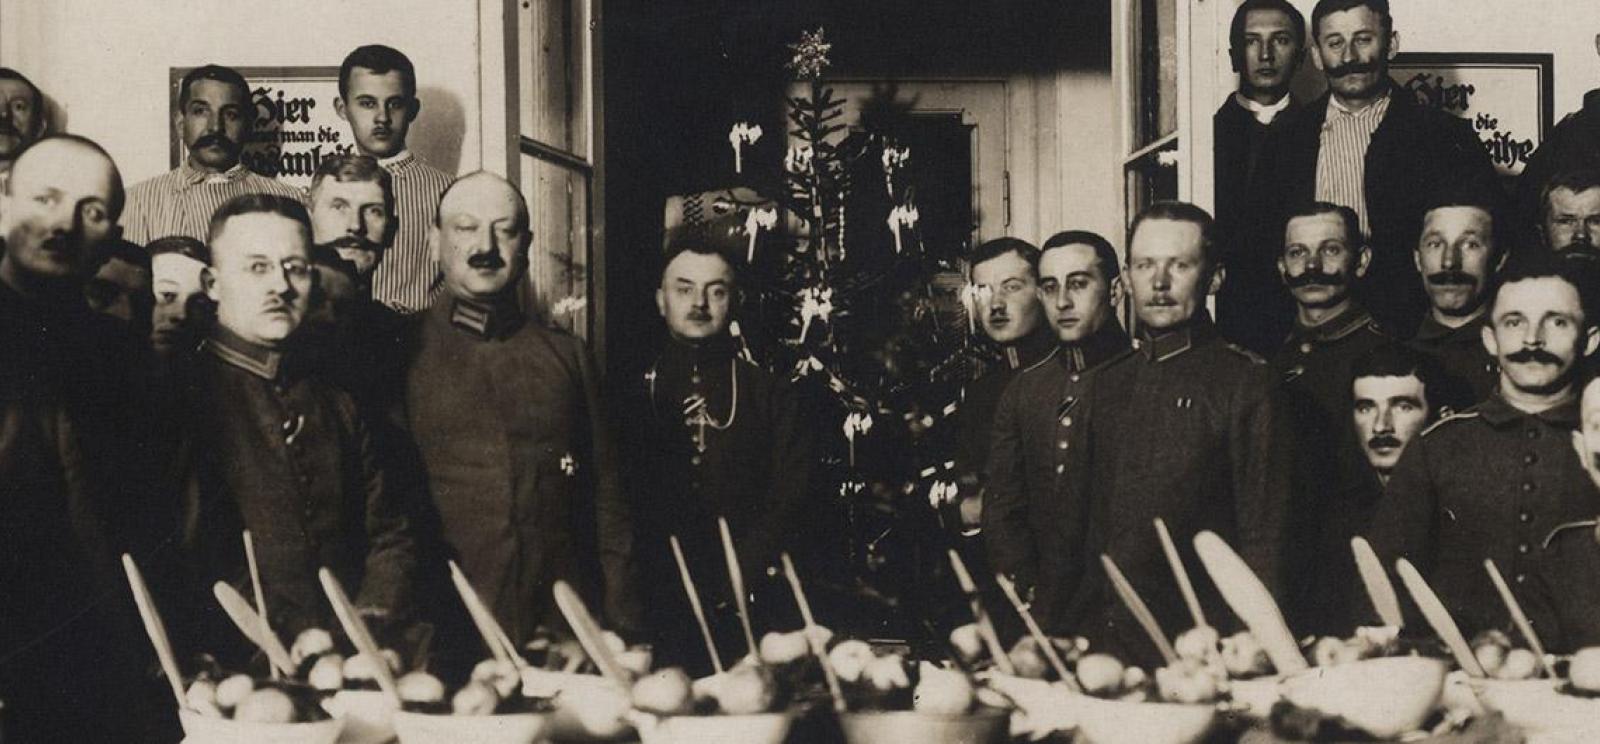 Large group of white men in military uniform gathered around an expansive table filled with food and utensils. There is a Christmas tree in the background.